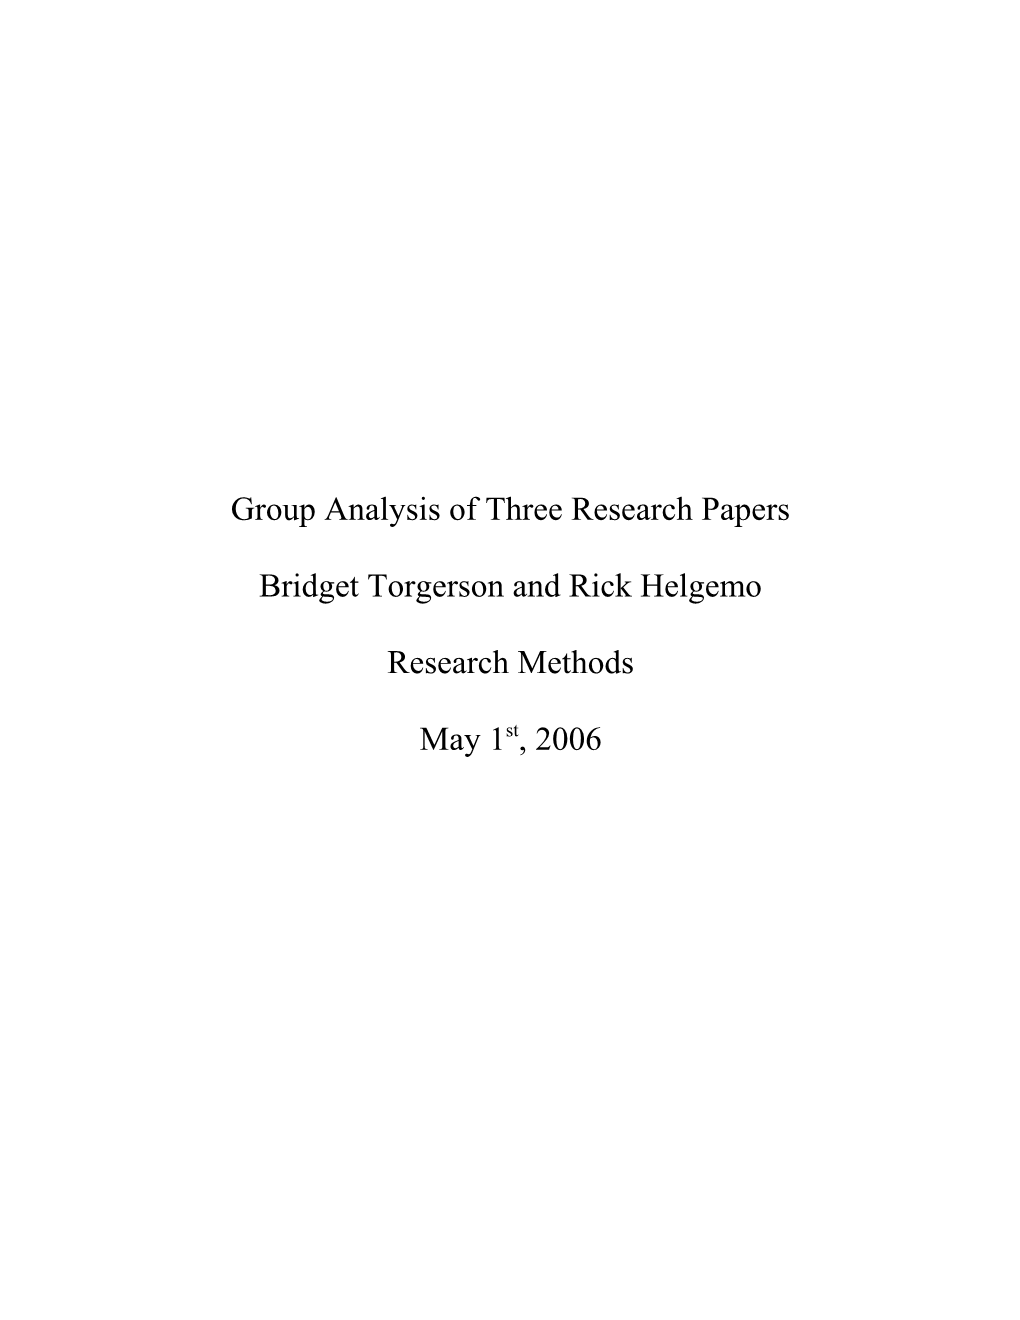 Group Analysis of Three Research Papers 10